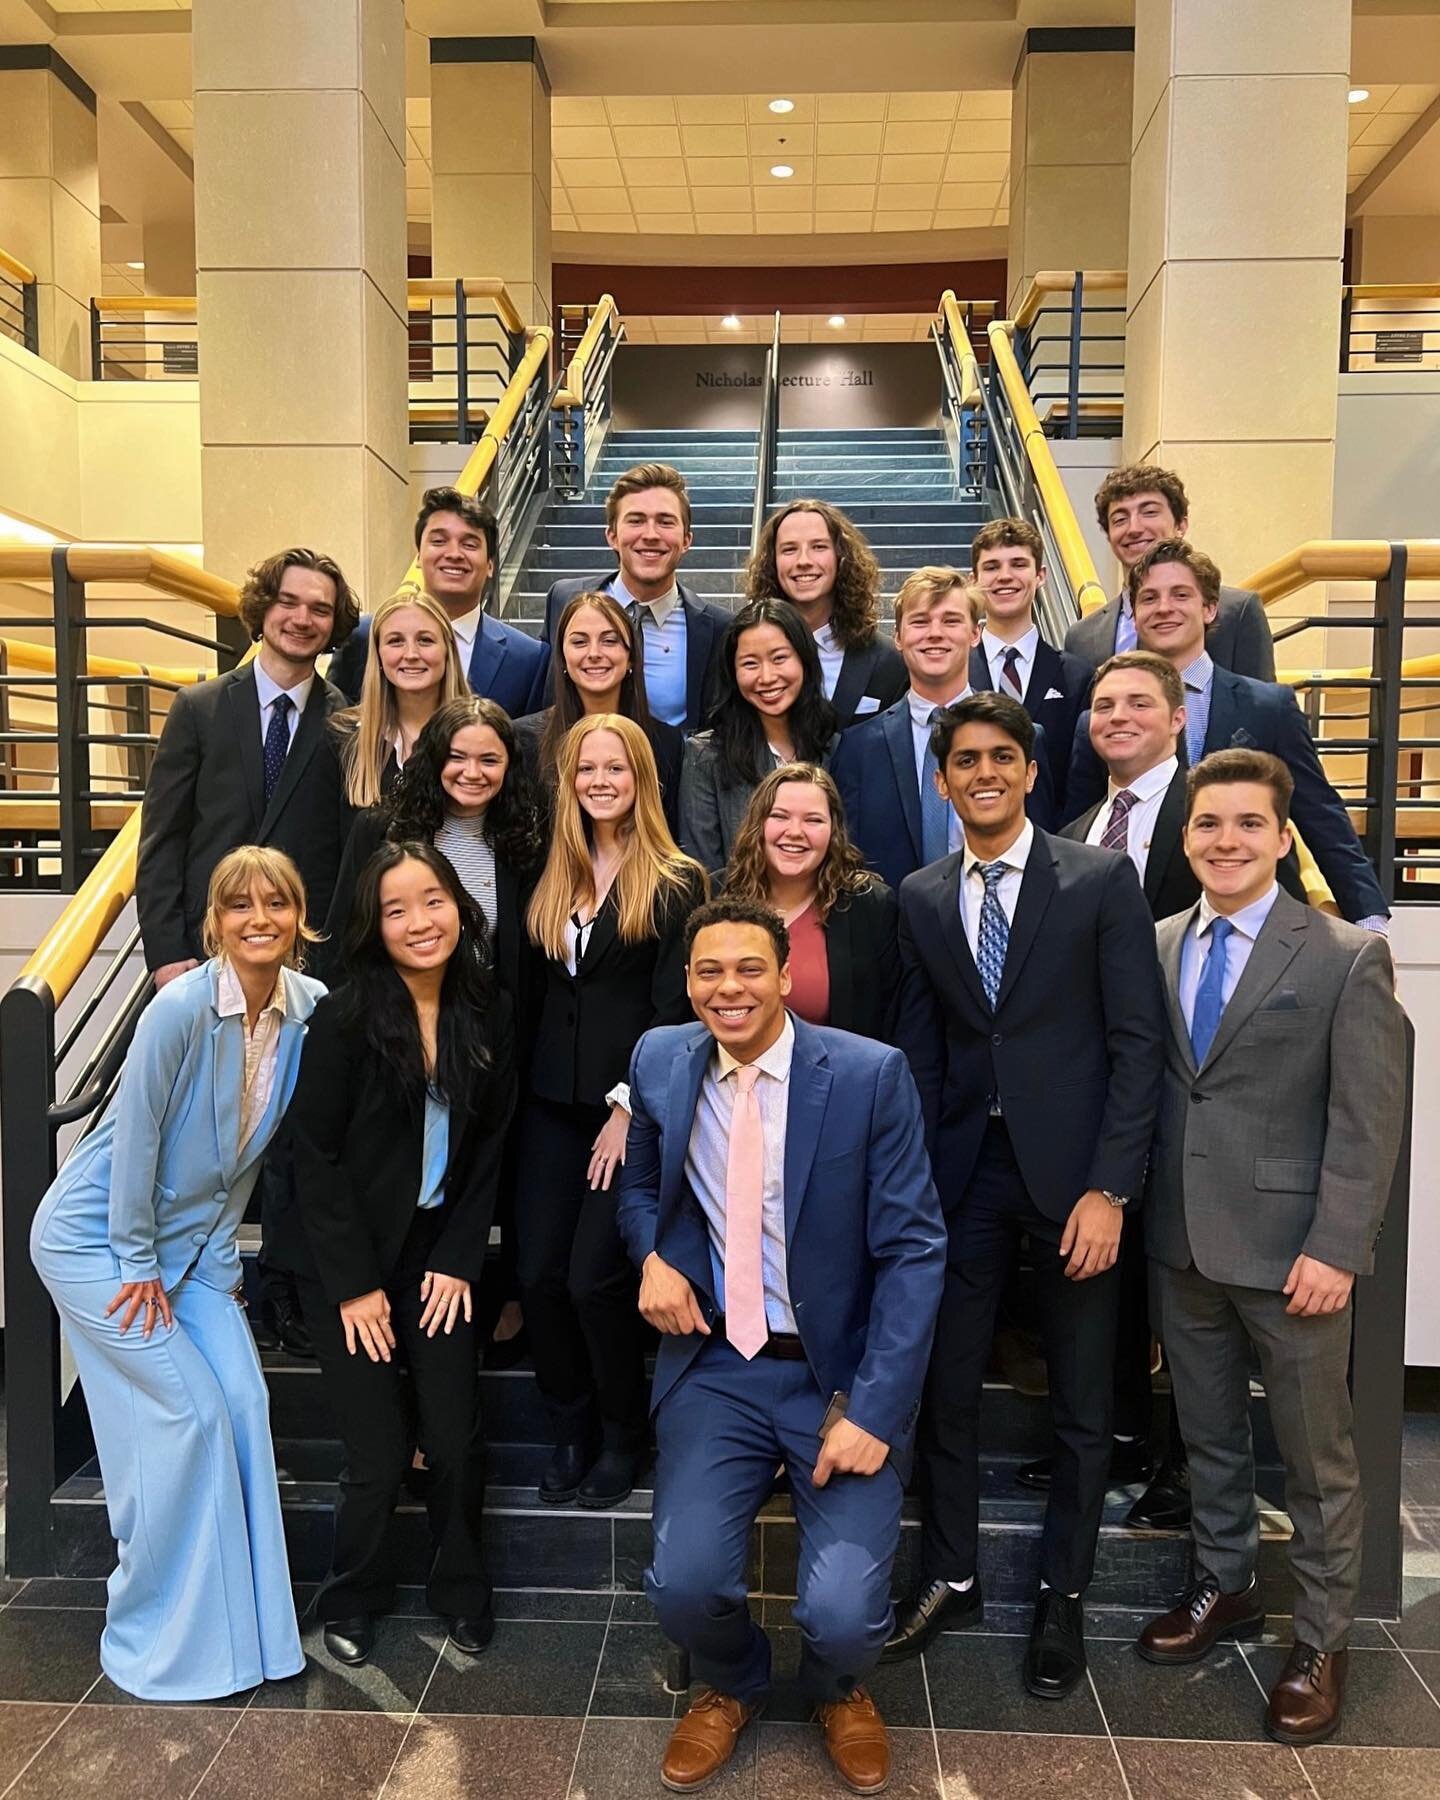 Congratulations to the Omega pledge class on their initiation yesterday! The Psi chapter is so excited to be gaining 19 new brothers, and we cannot wait to see their successes in DSP! 🥂